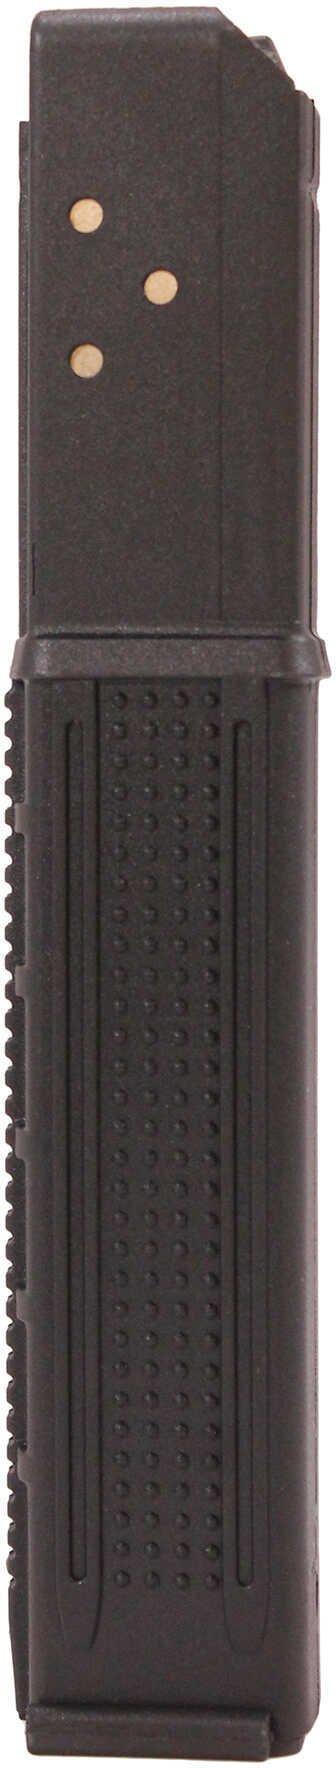 ProMag AR-15 SMG/Carbine Steel Lined 9mm 32 Rounds Black Polymer Magazine